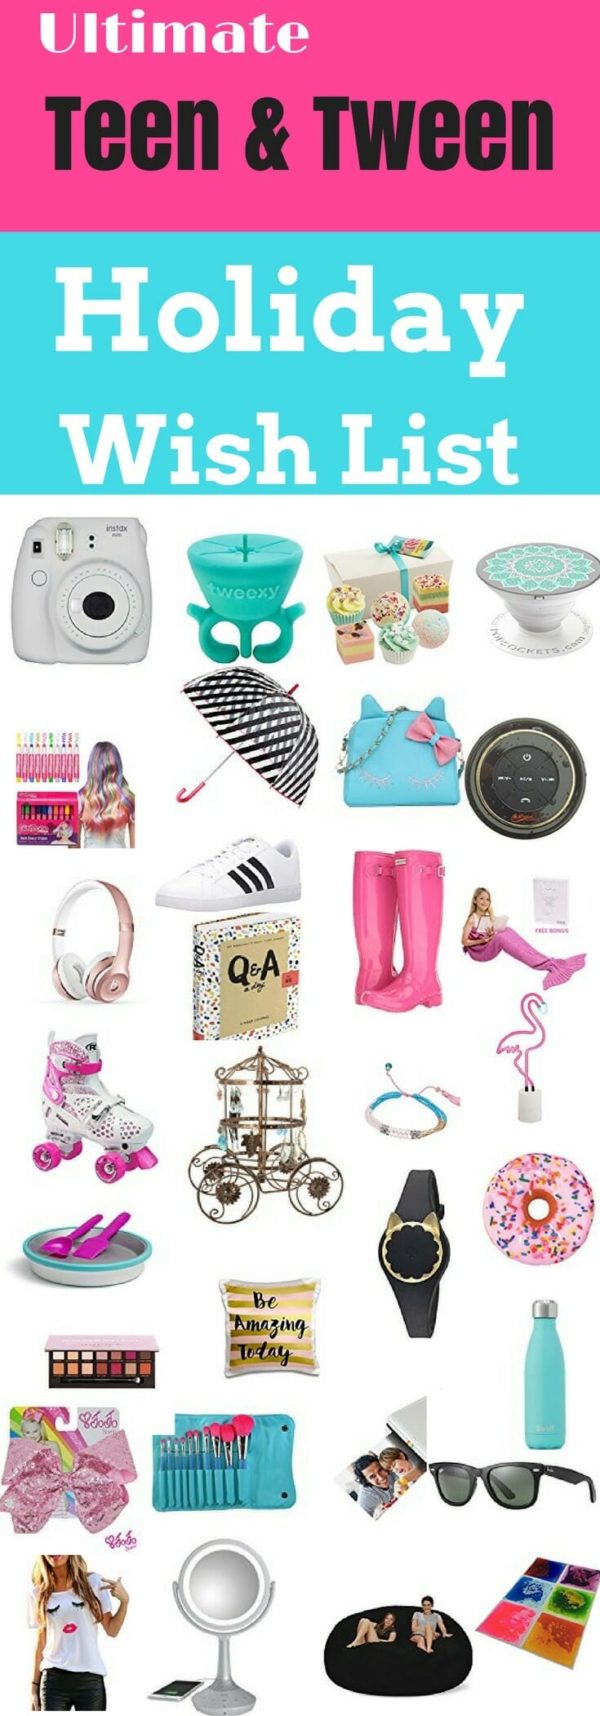 40 Gifts For Teen Girls What Teenagers Want For Christmas (2019)